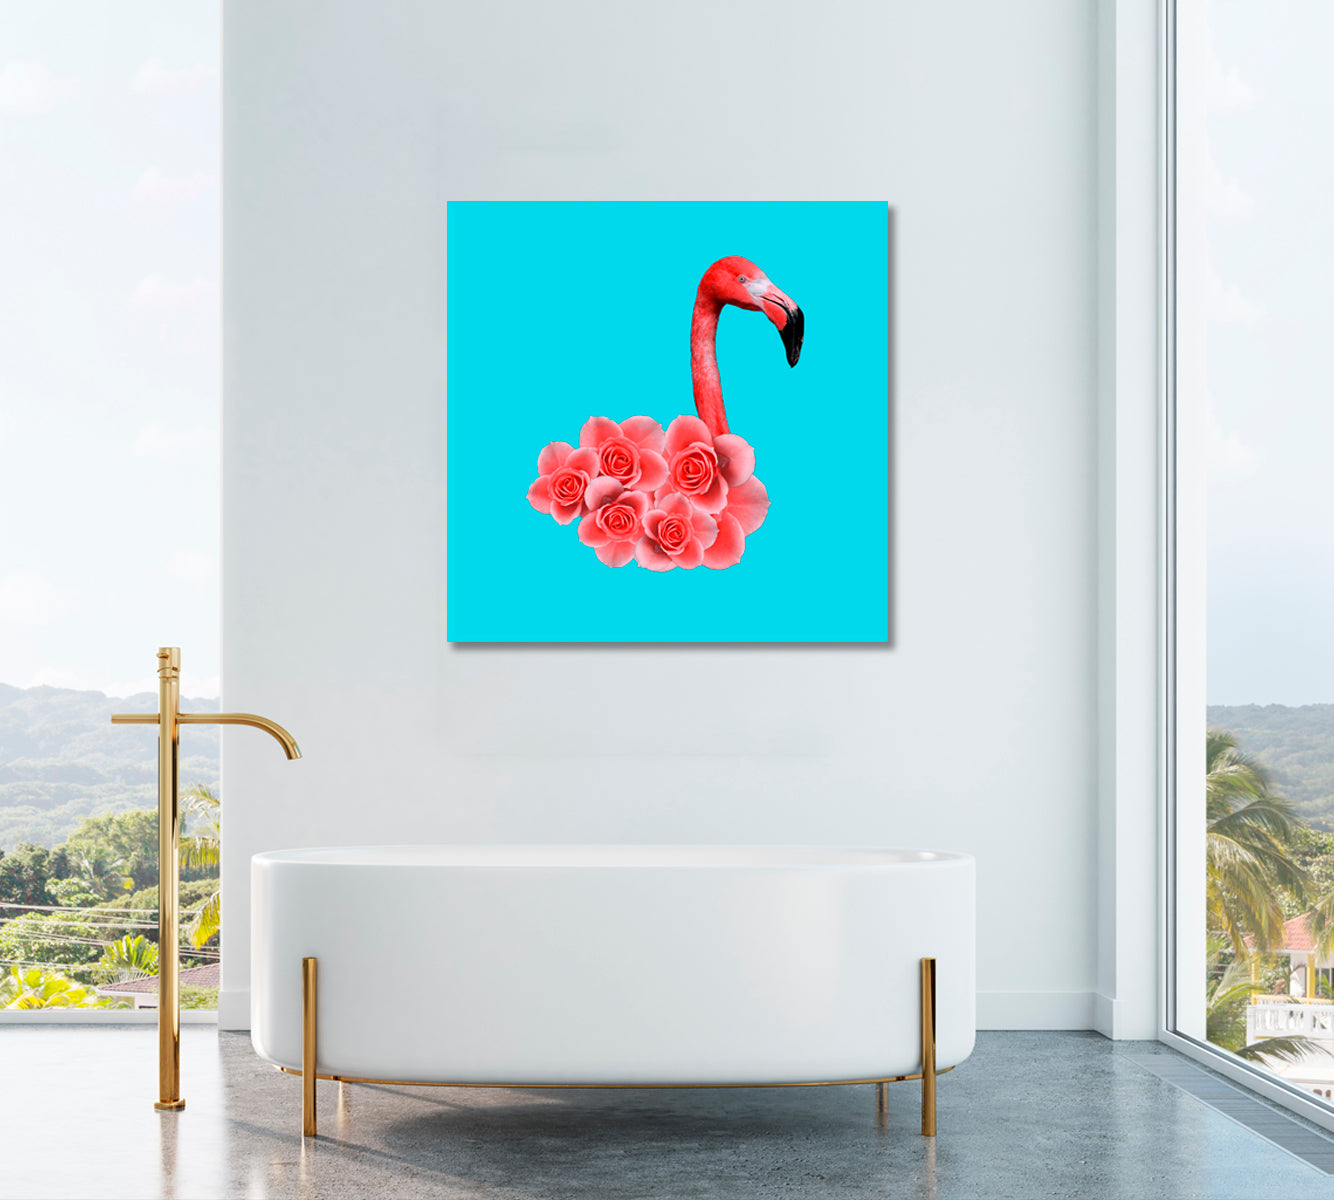 Flamingo with Flowers Canvas Print ArtLexy 1 Panel 12"x12" inches 